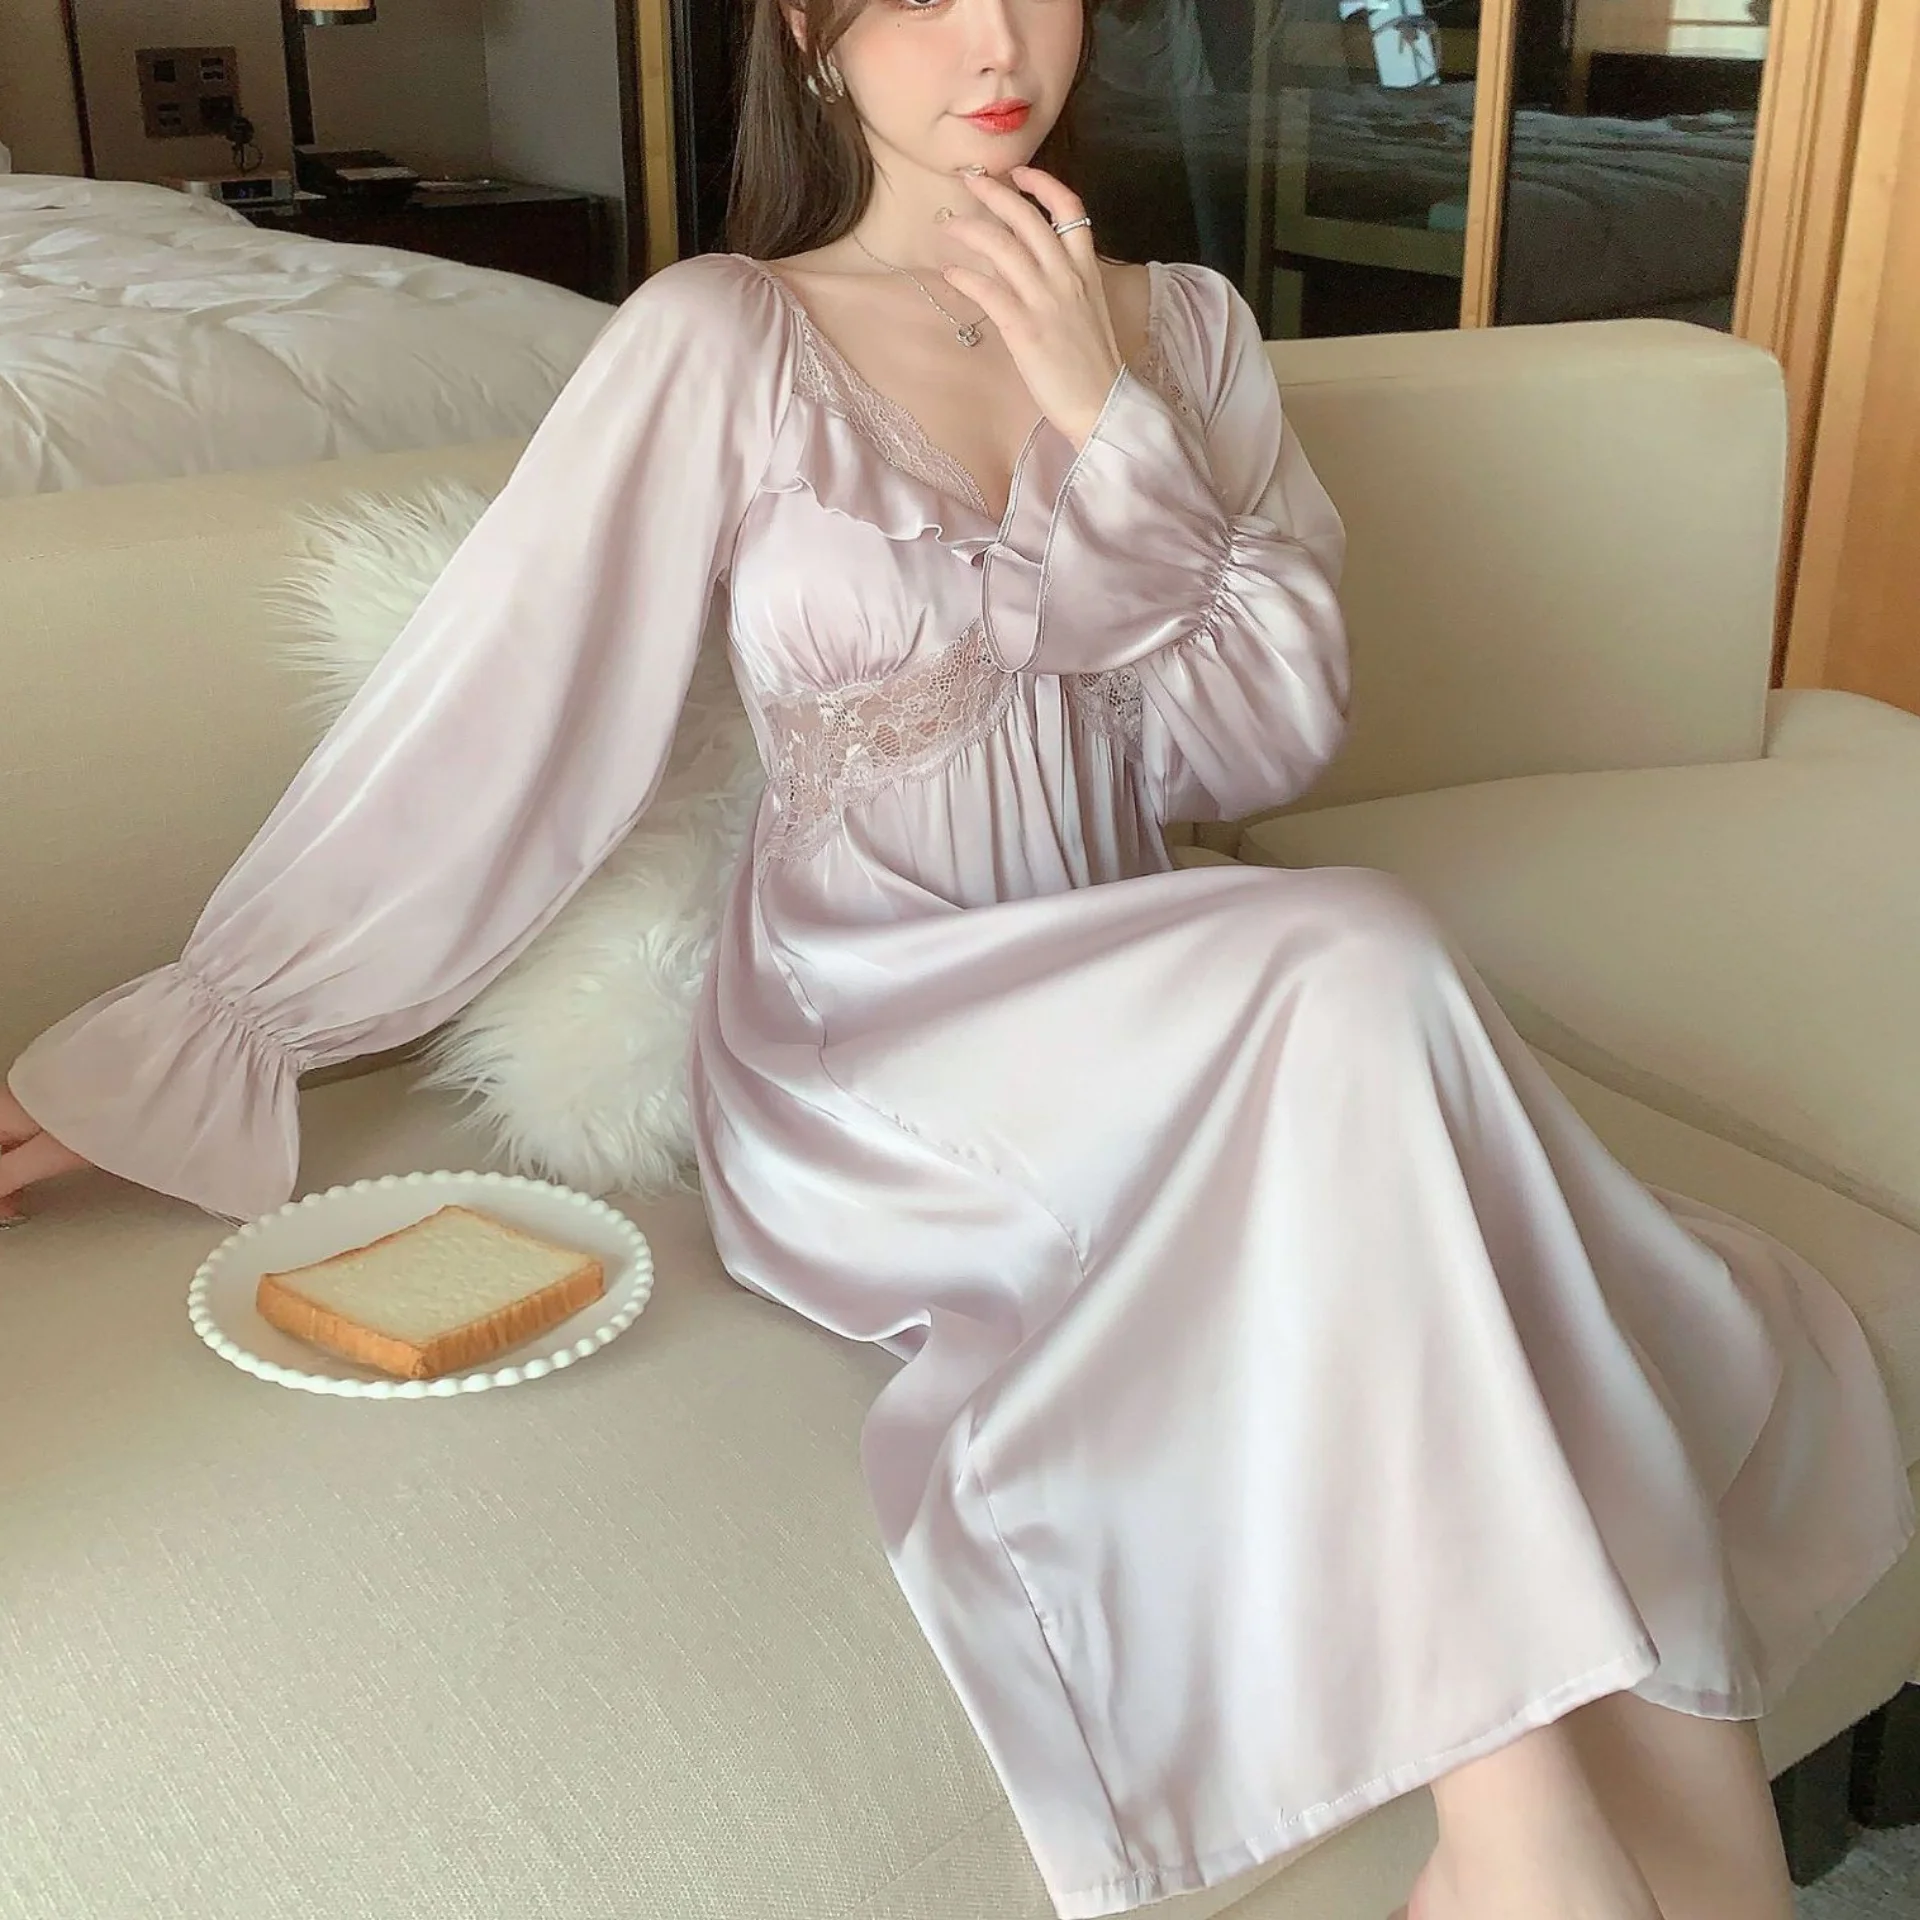 

Palace Style Nightgown Female Long Nightdress Elegant Hollow Out Sleepwear Sexy Lace Trim Nightwear Casual Home Dressing Gown